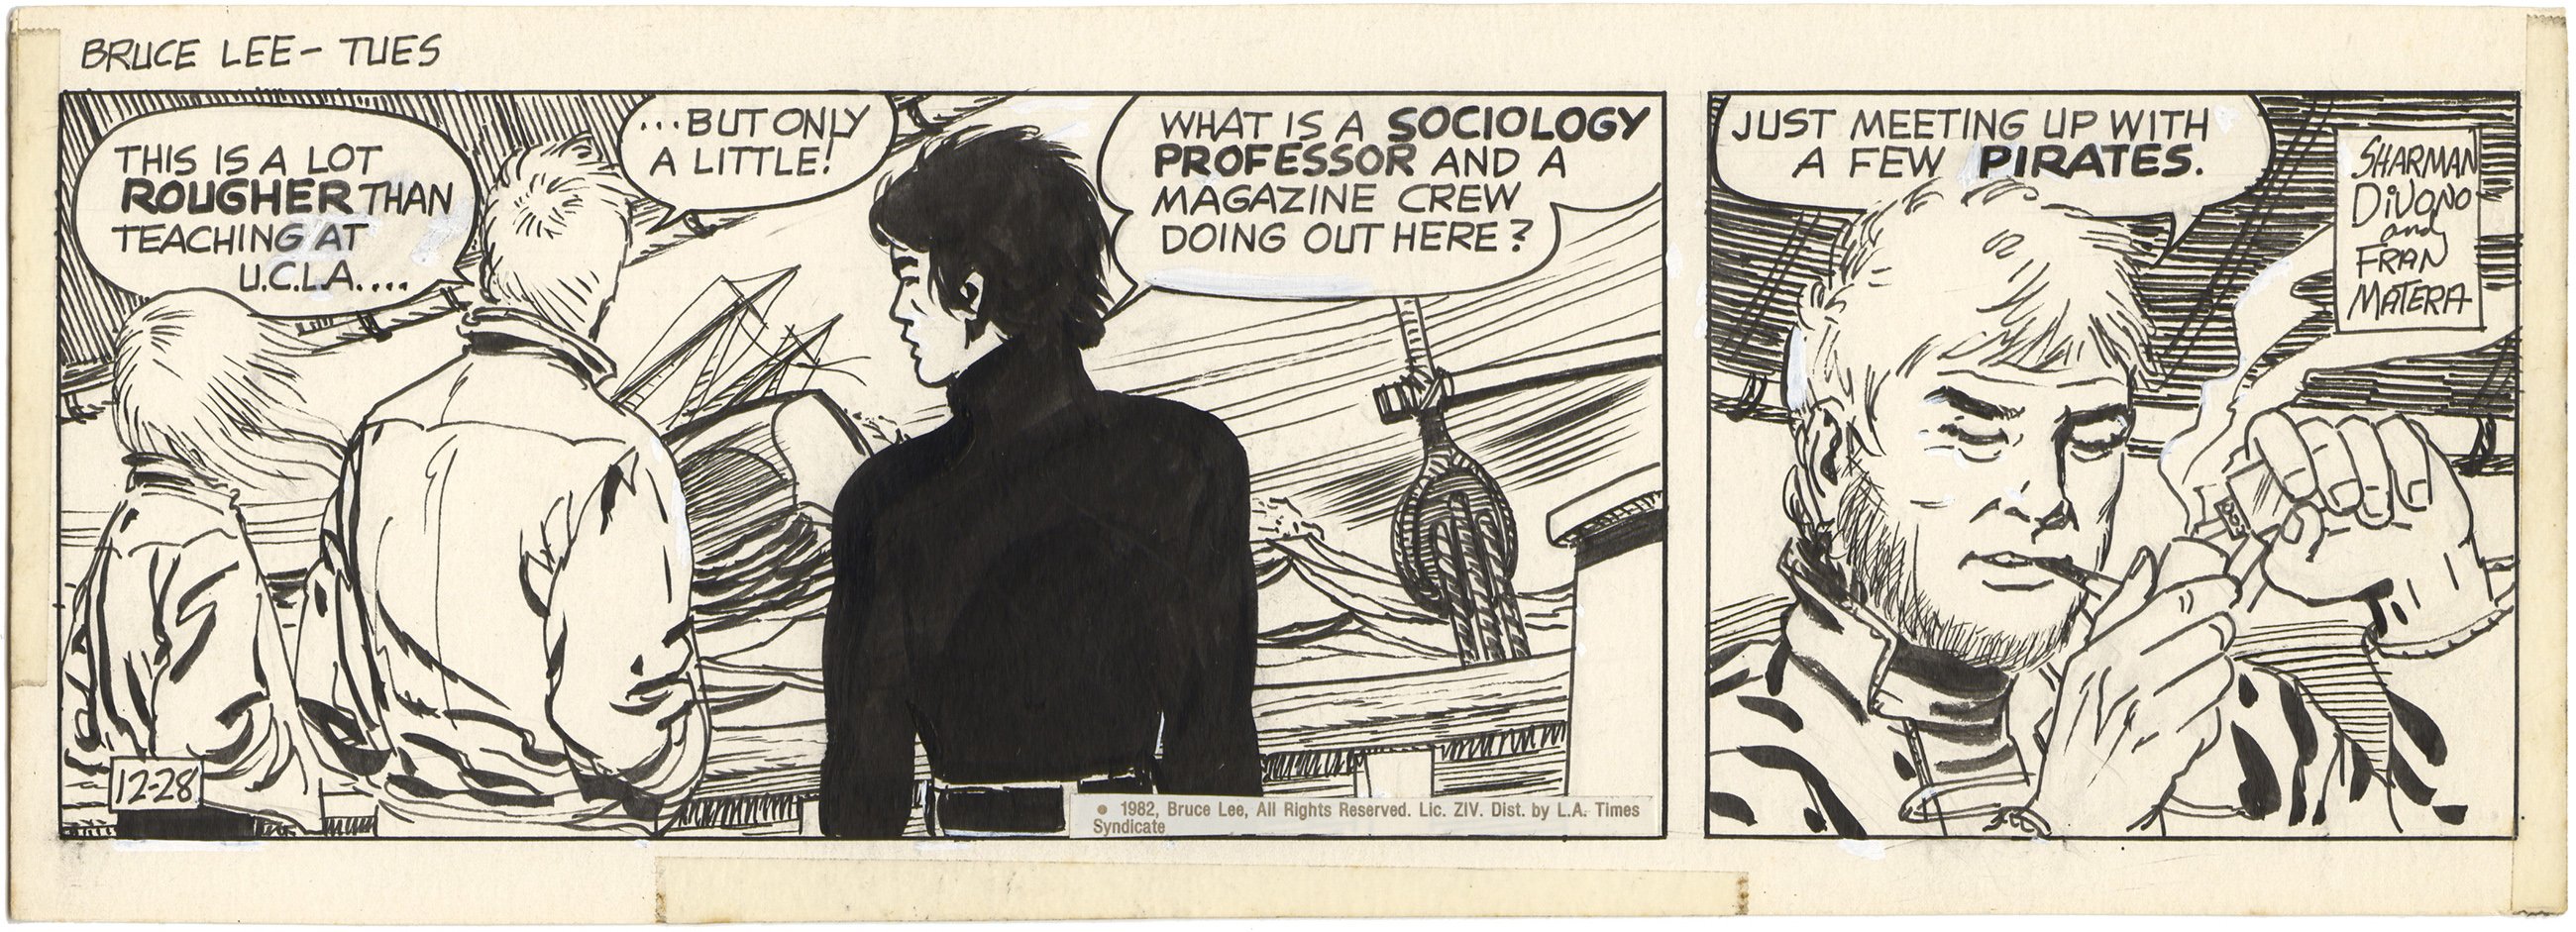 Legend of Bruce Lee, Daily Strip, 12/28/1982